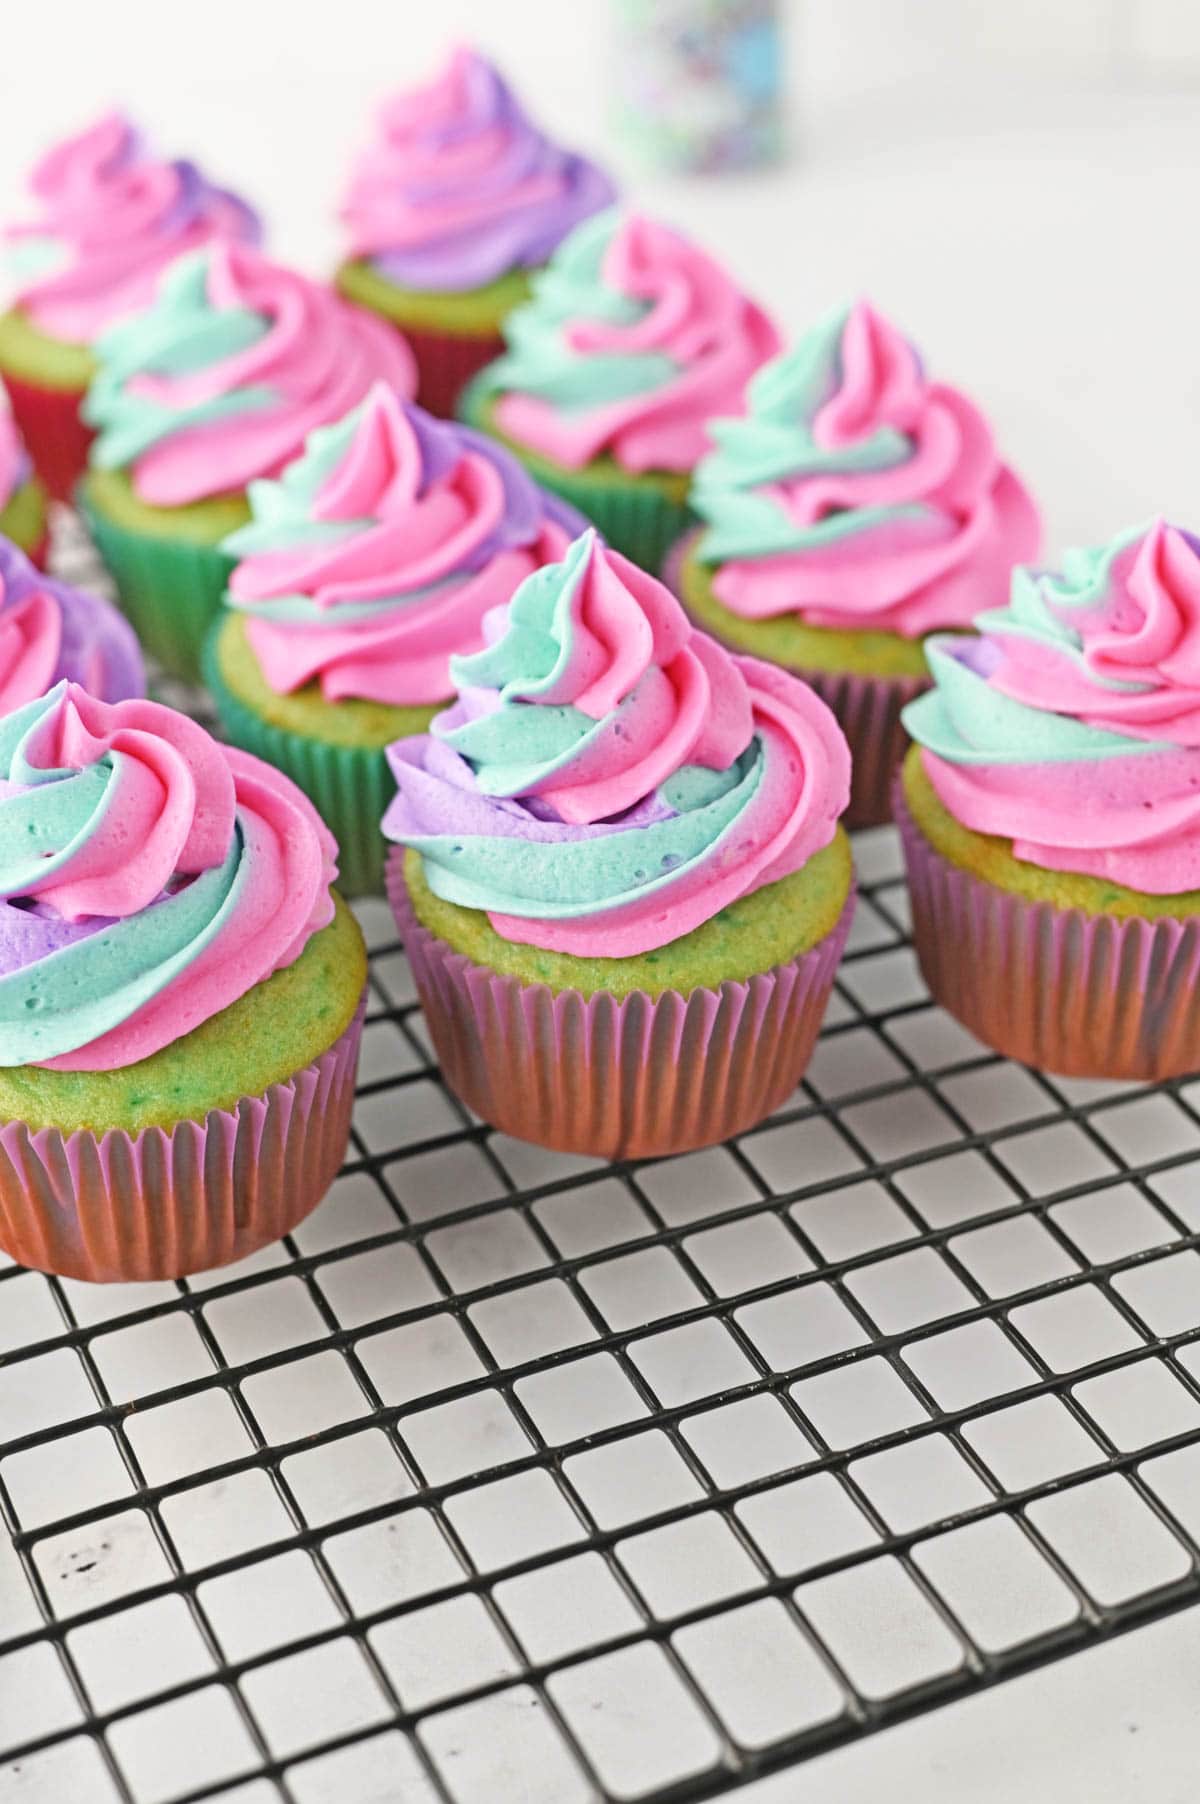 Blue-green colored cupcakes with pink, purple and teal frosting